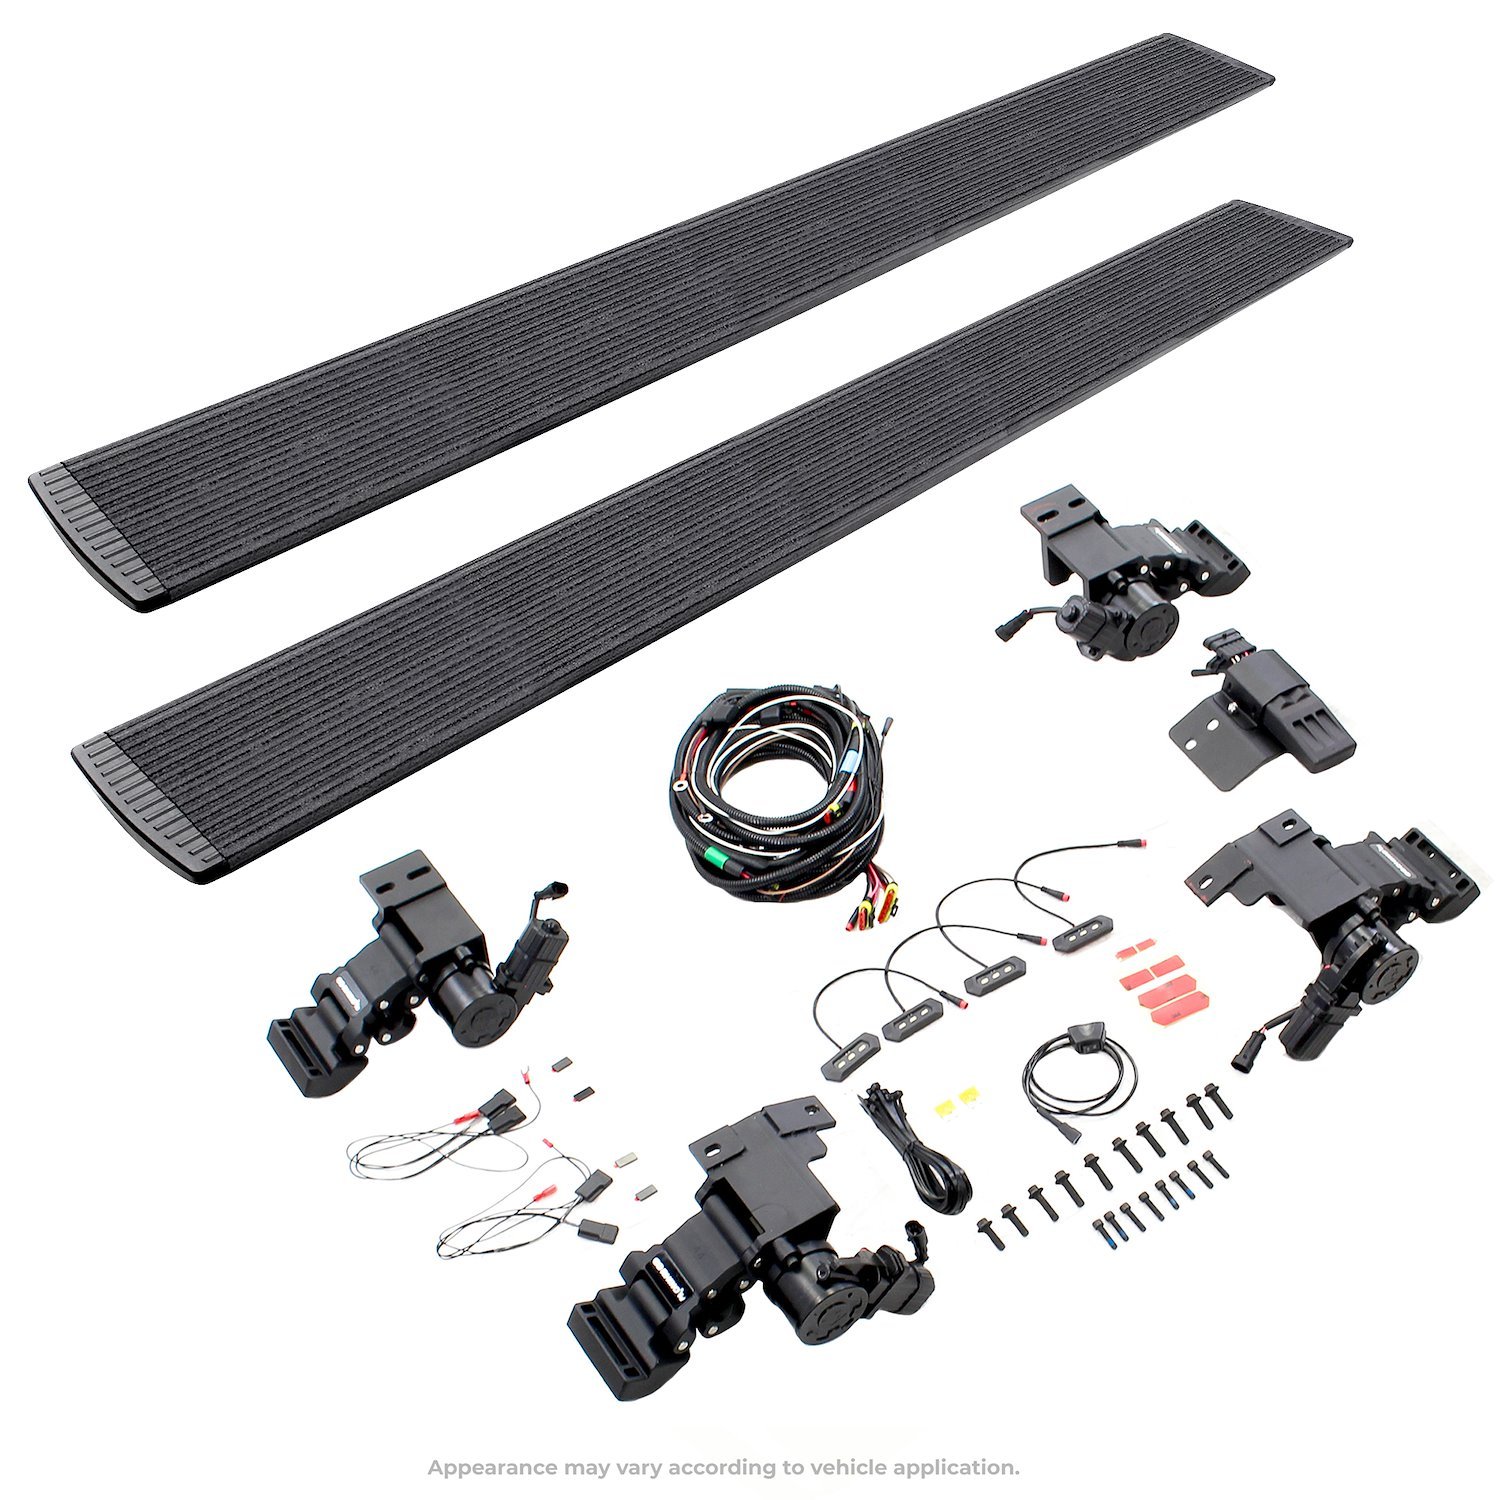 E1 Electric Running Board Kit Fits Select GMC Sierra 3500 HD Crew Cab Pickup - Diesel Only